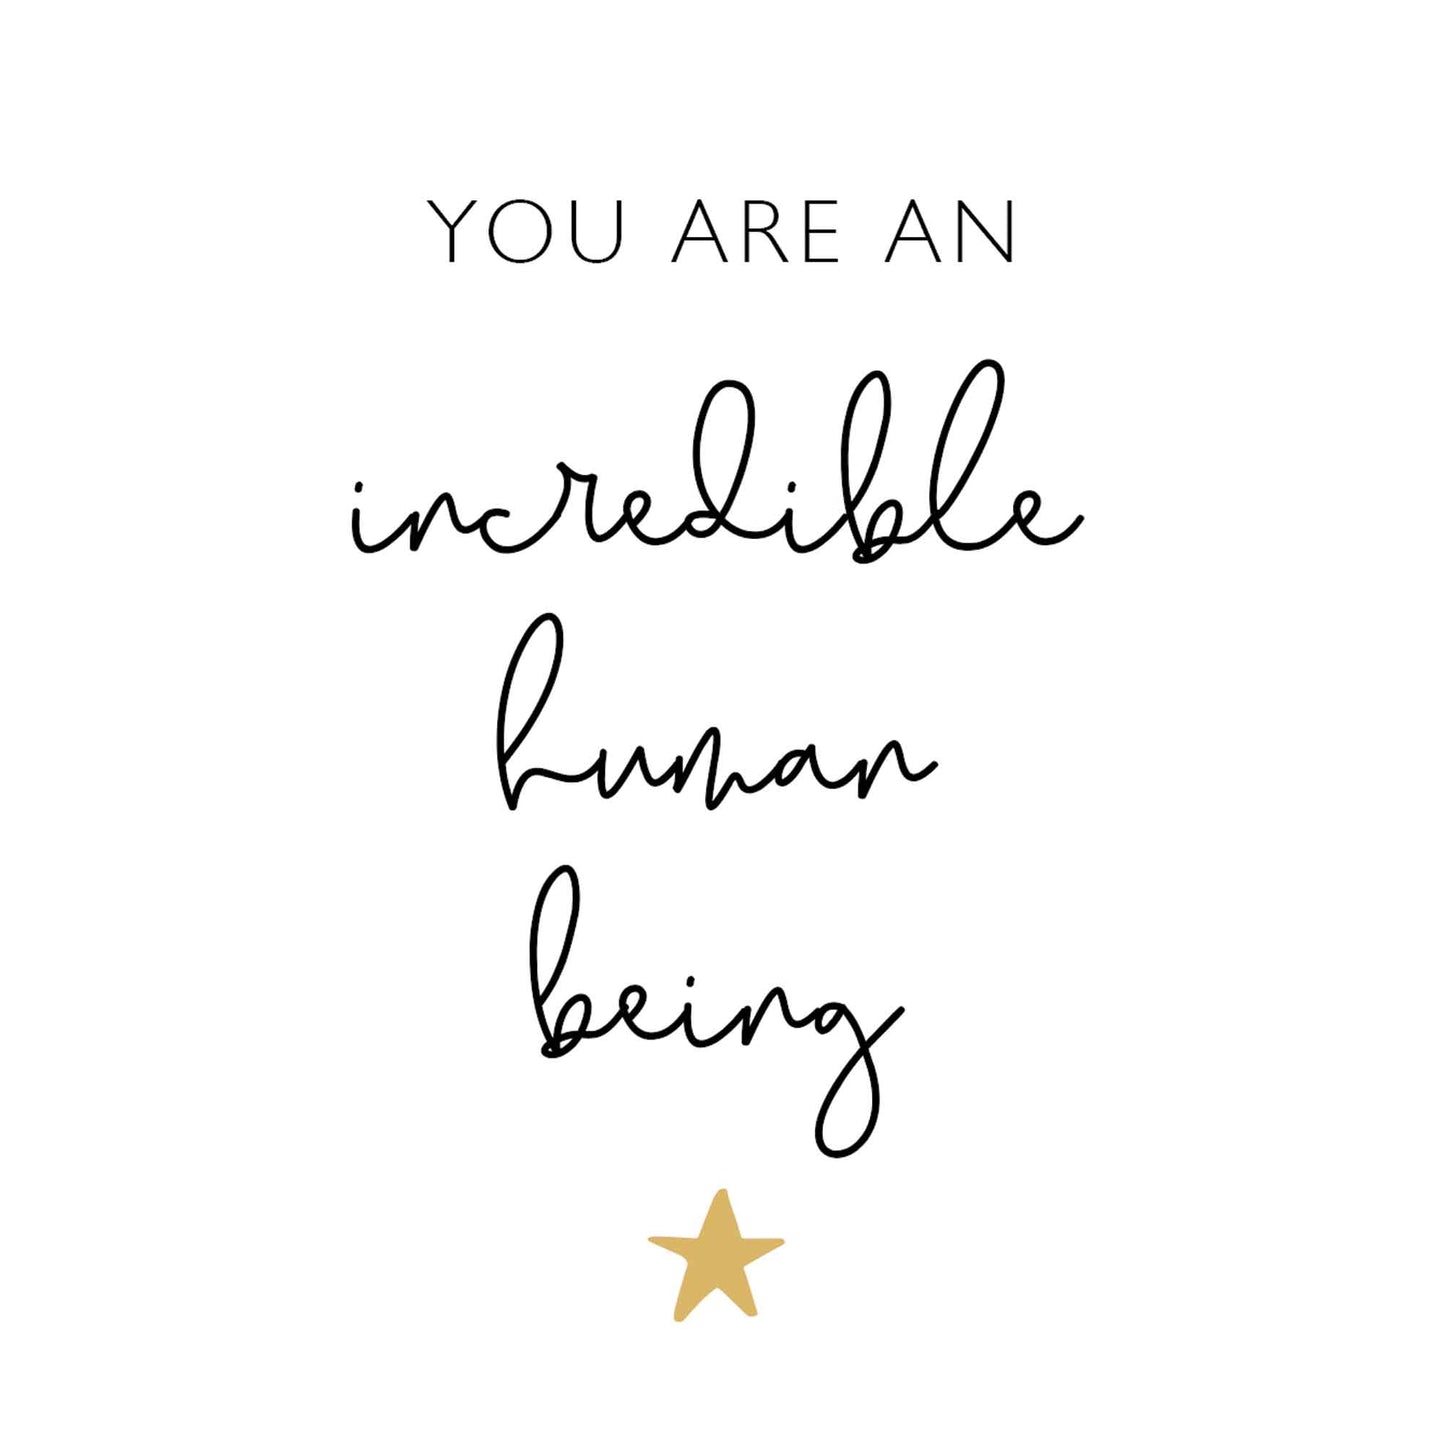 Printable You Are An Incredible Human Being Greeting Card - Instant Digital Download